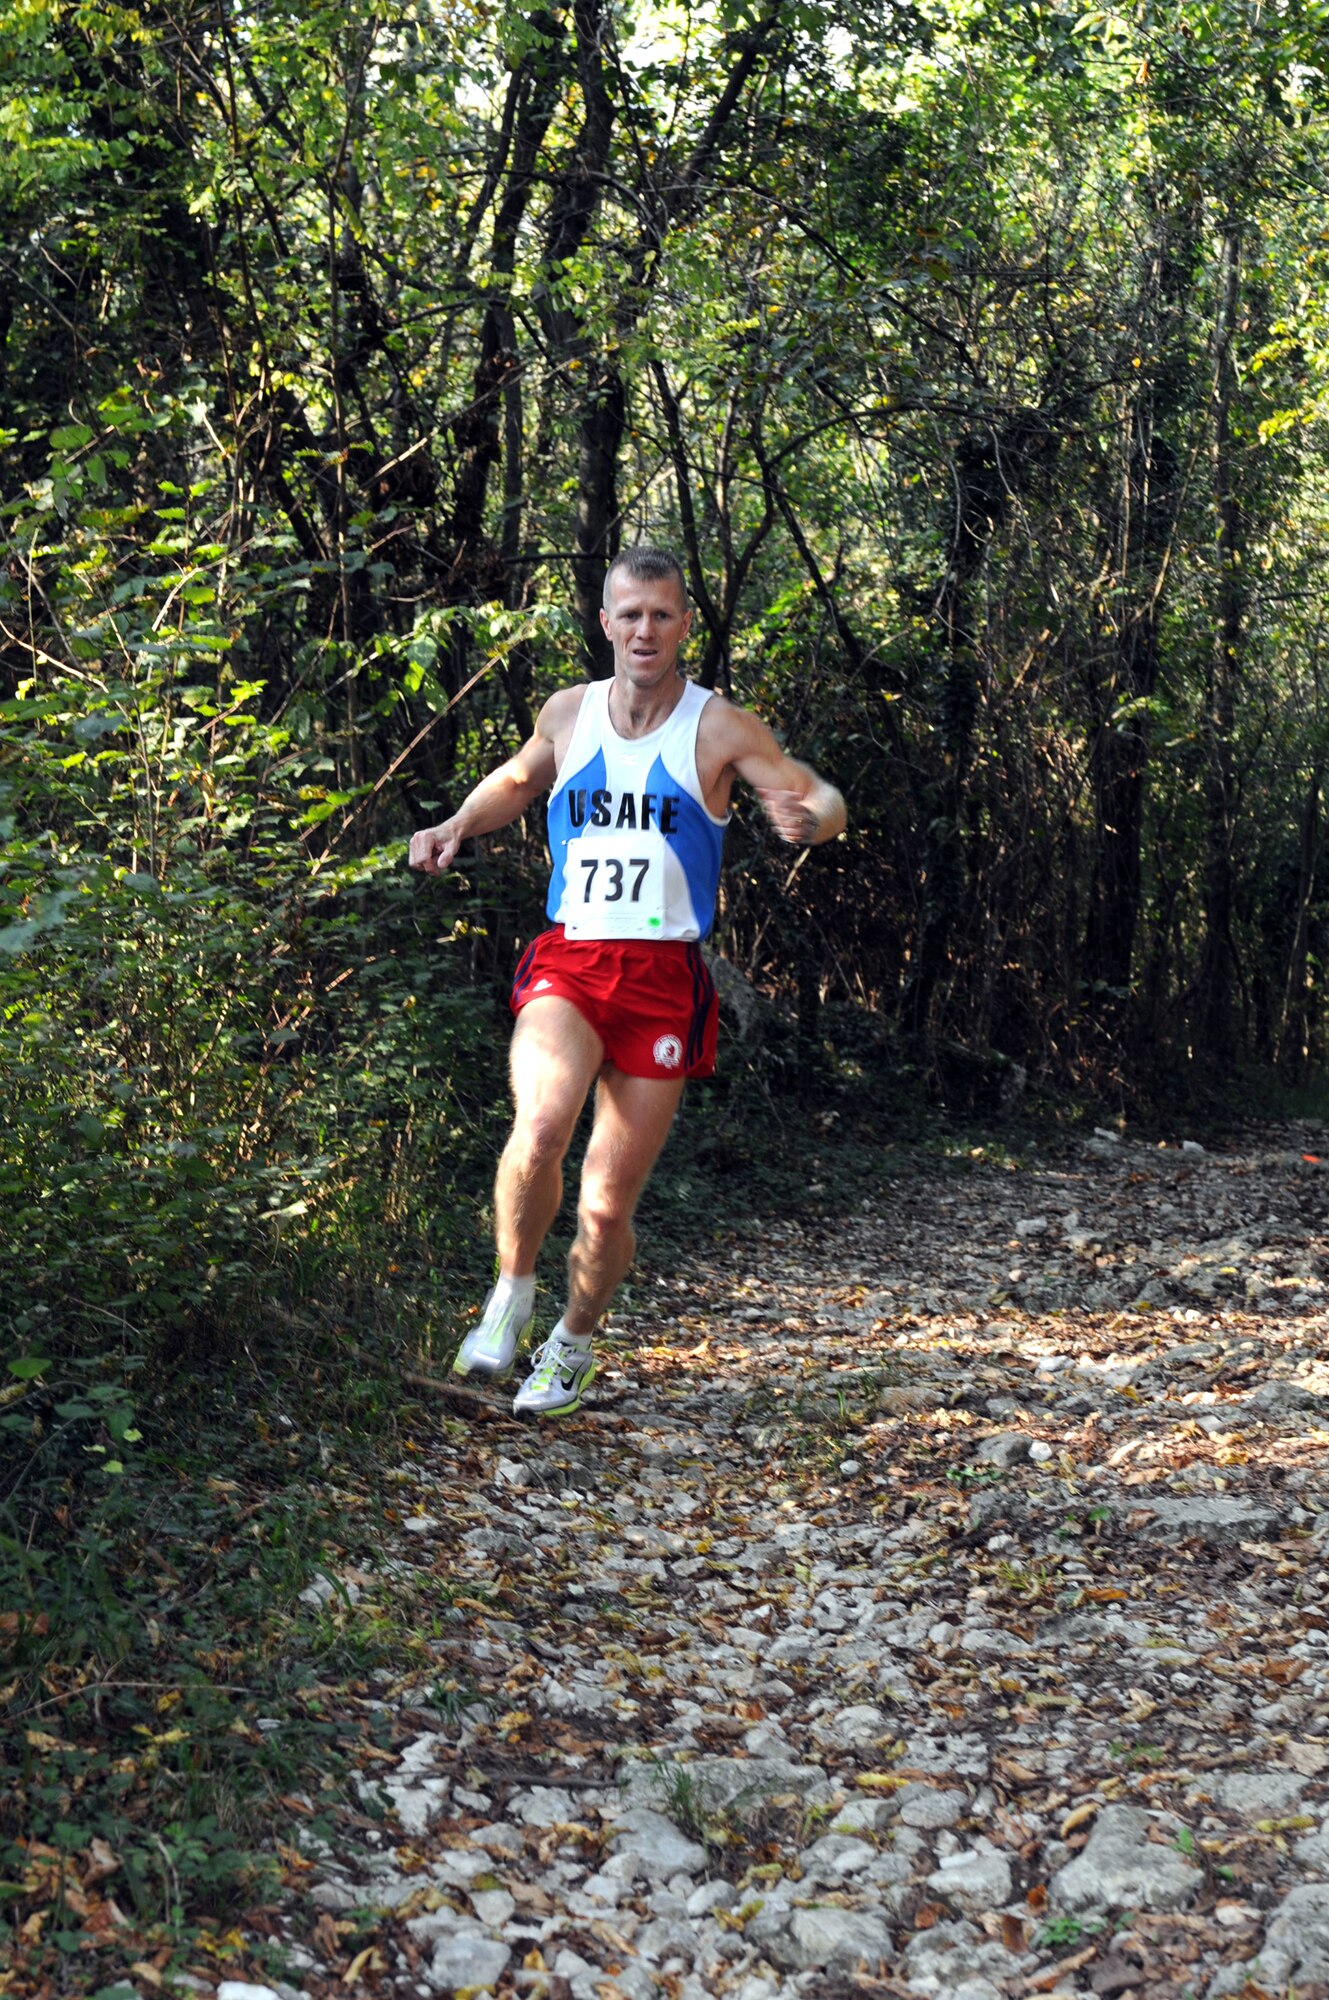 Donnie Gray, 31st Communications Squadron, runs along the 2010 U.S. Air Forces in Europe Cross-Country Central Region Championships 10 km course Oct. 15 at Madonna Del Monte, Aviano, Italy. Gray took first place in the men's 10 km race with a time of 38:35, while Antoaneta Fitzpatrick, 31st Medical Group, took first in the women's 5 km event with a time of 24:19. (U.S. Air Force photo/Staff Sgt. Julius Delos Reyes)